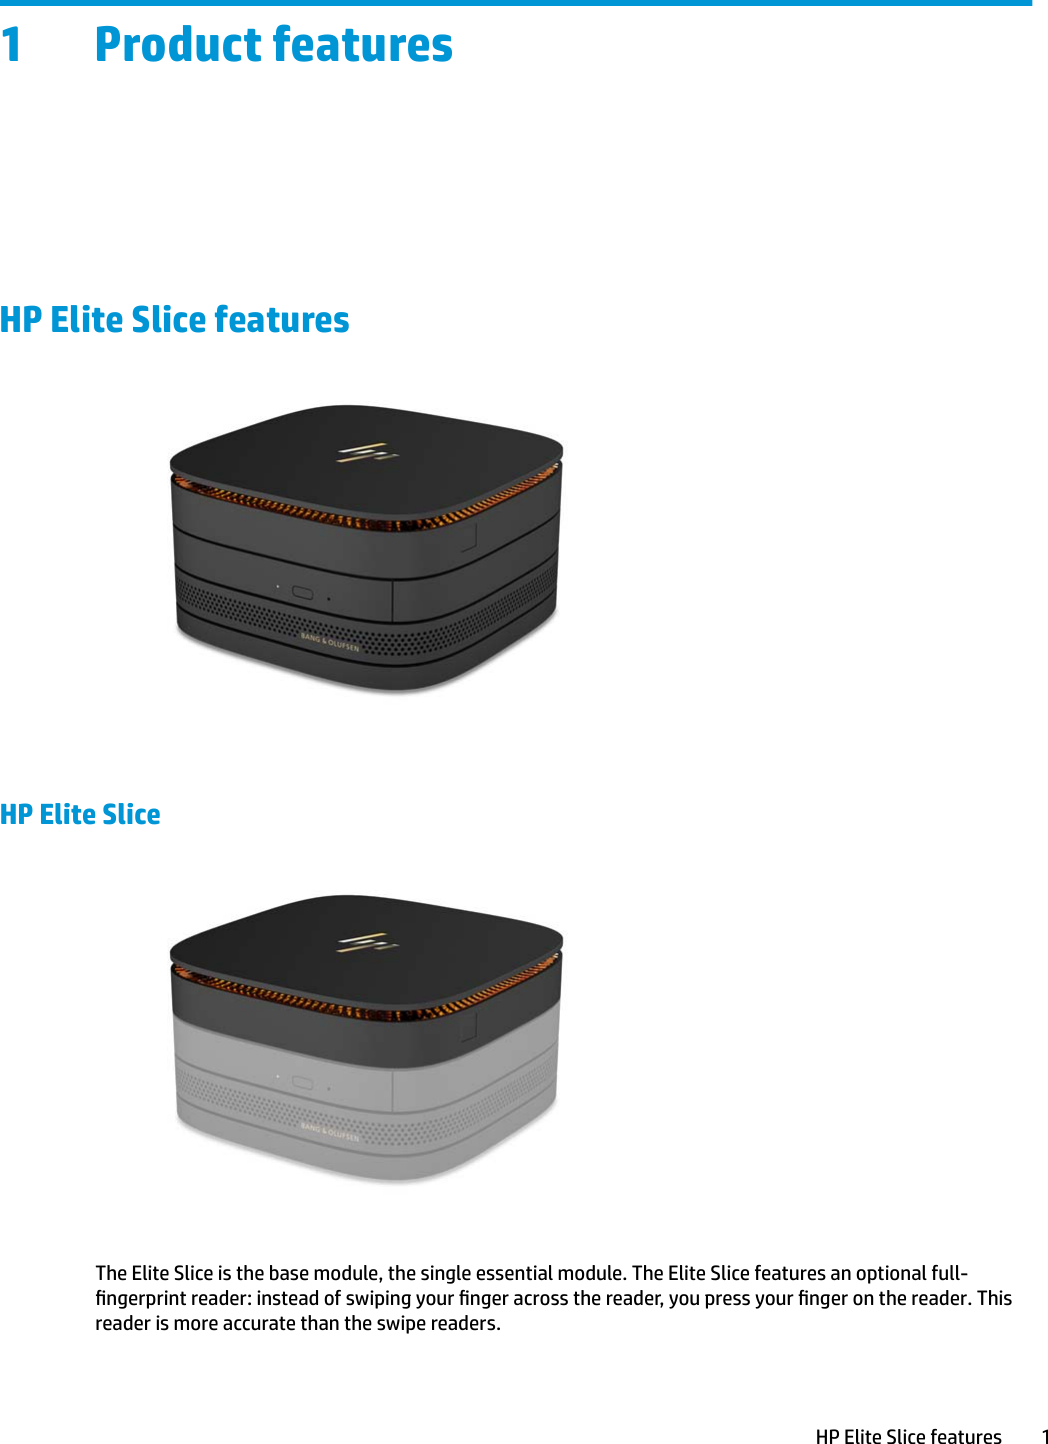 1 Product featuresHP Elite Slice featuresHP Elite SliceThe Elite Slice is the base module, the single essential module. The Elite Slice features an optional full-ngerprint reader: instead of swiping your nger across the reader, you press your nger on the reader. This reader is more accurate than the swipe readers.HP Elite Slice features 1